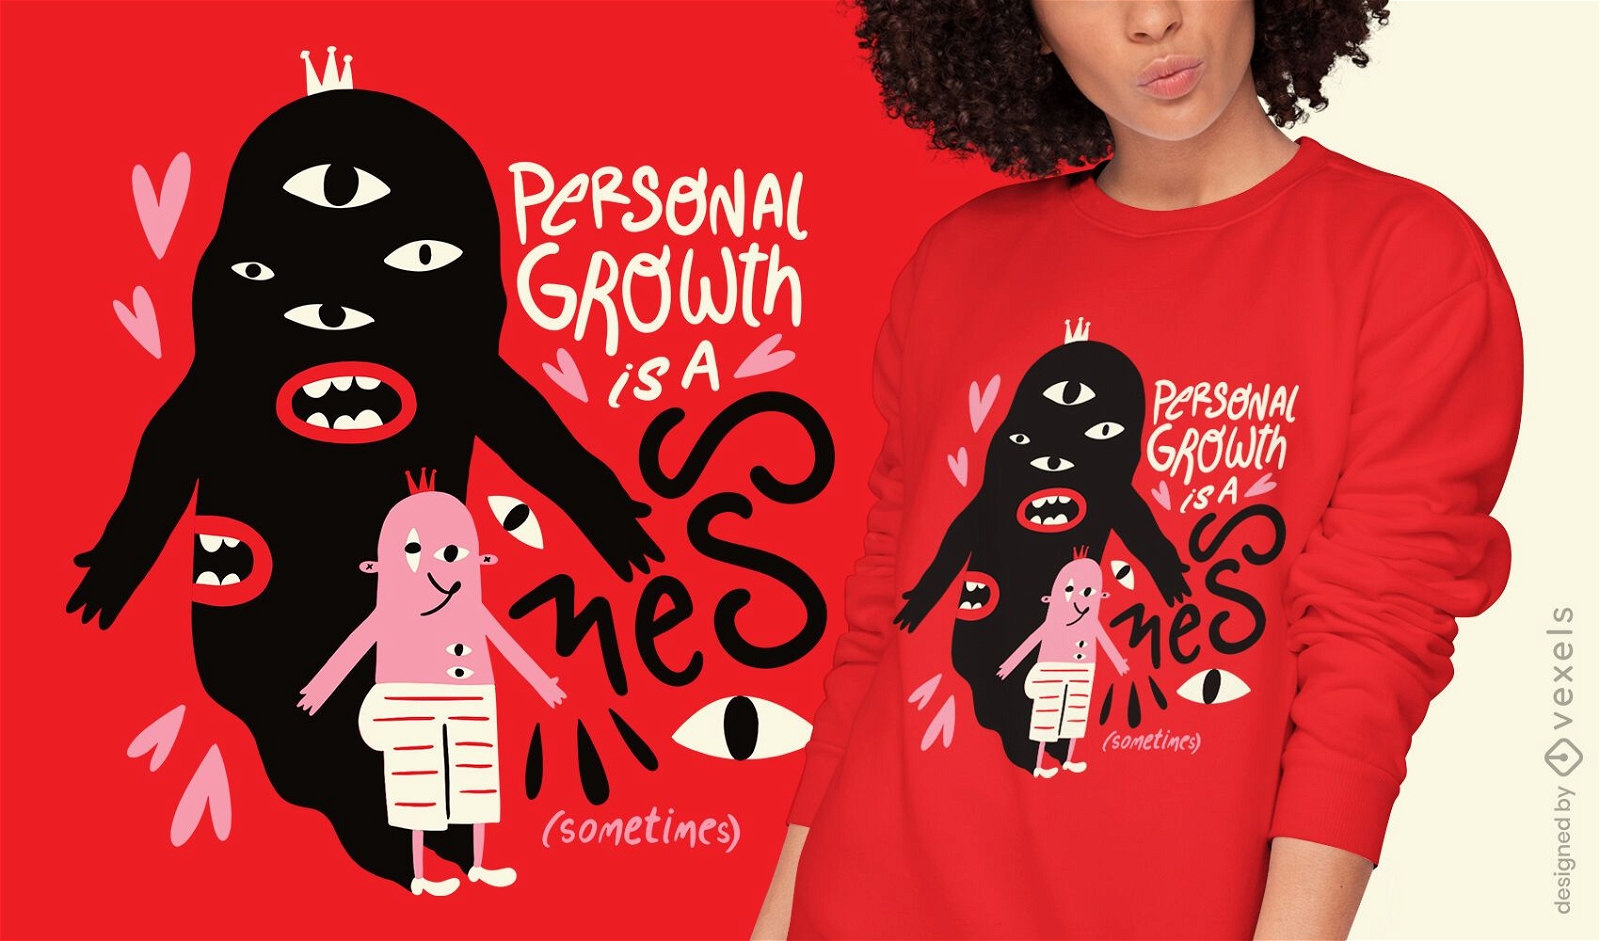 Abstract creature personal growth t-shirt design